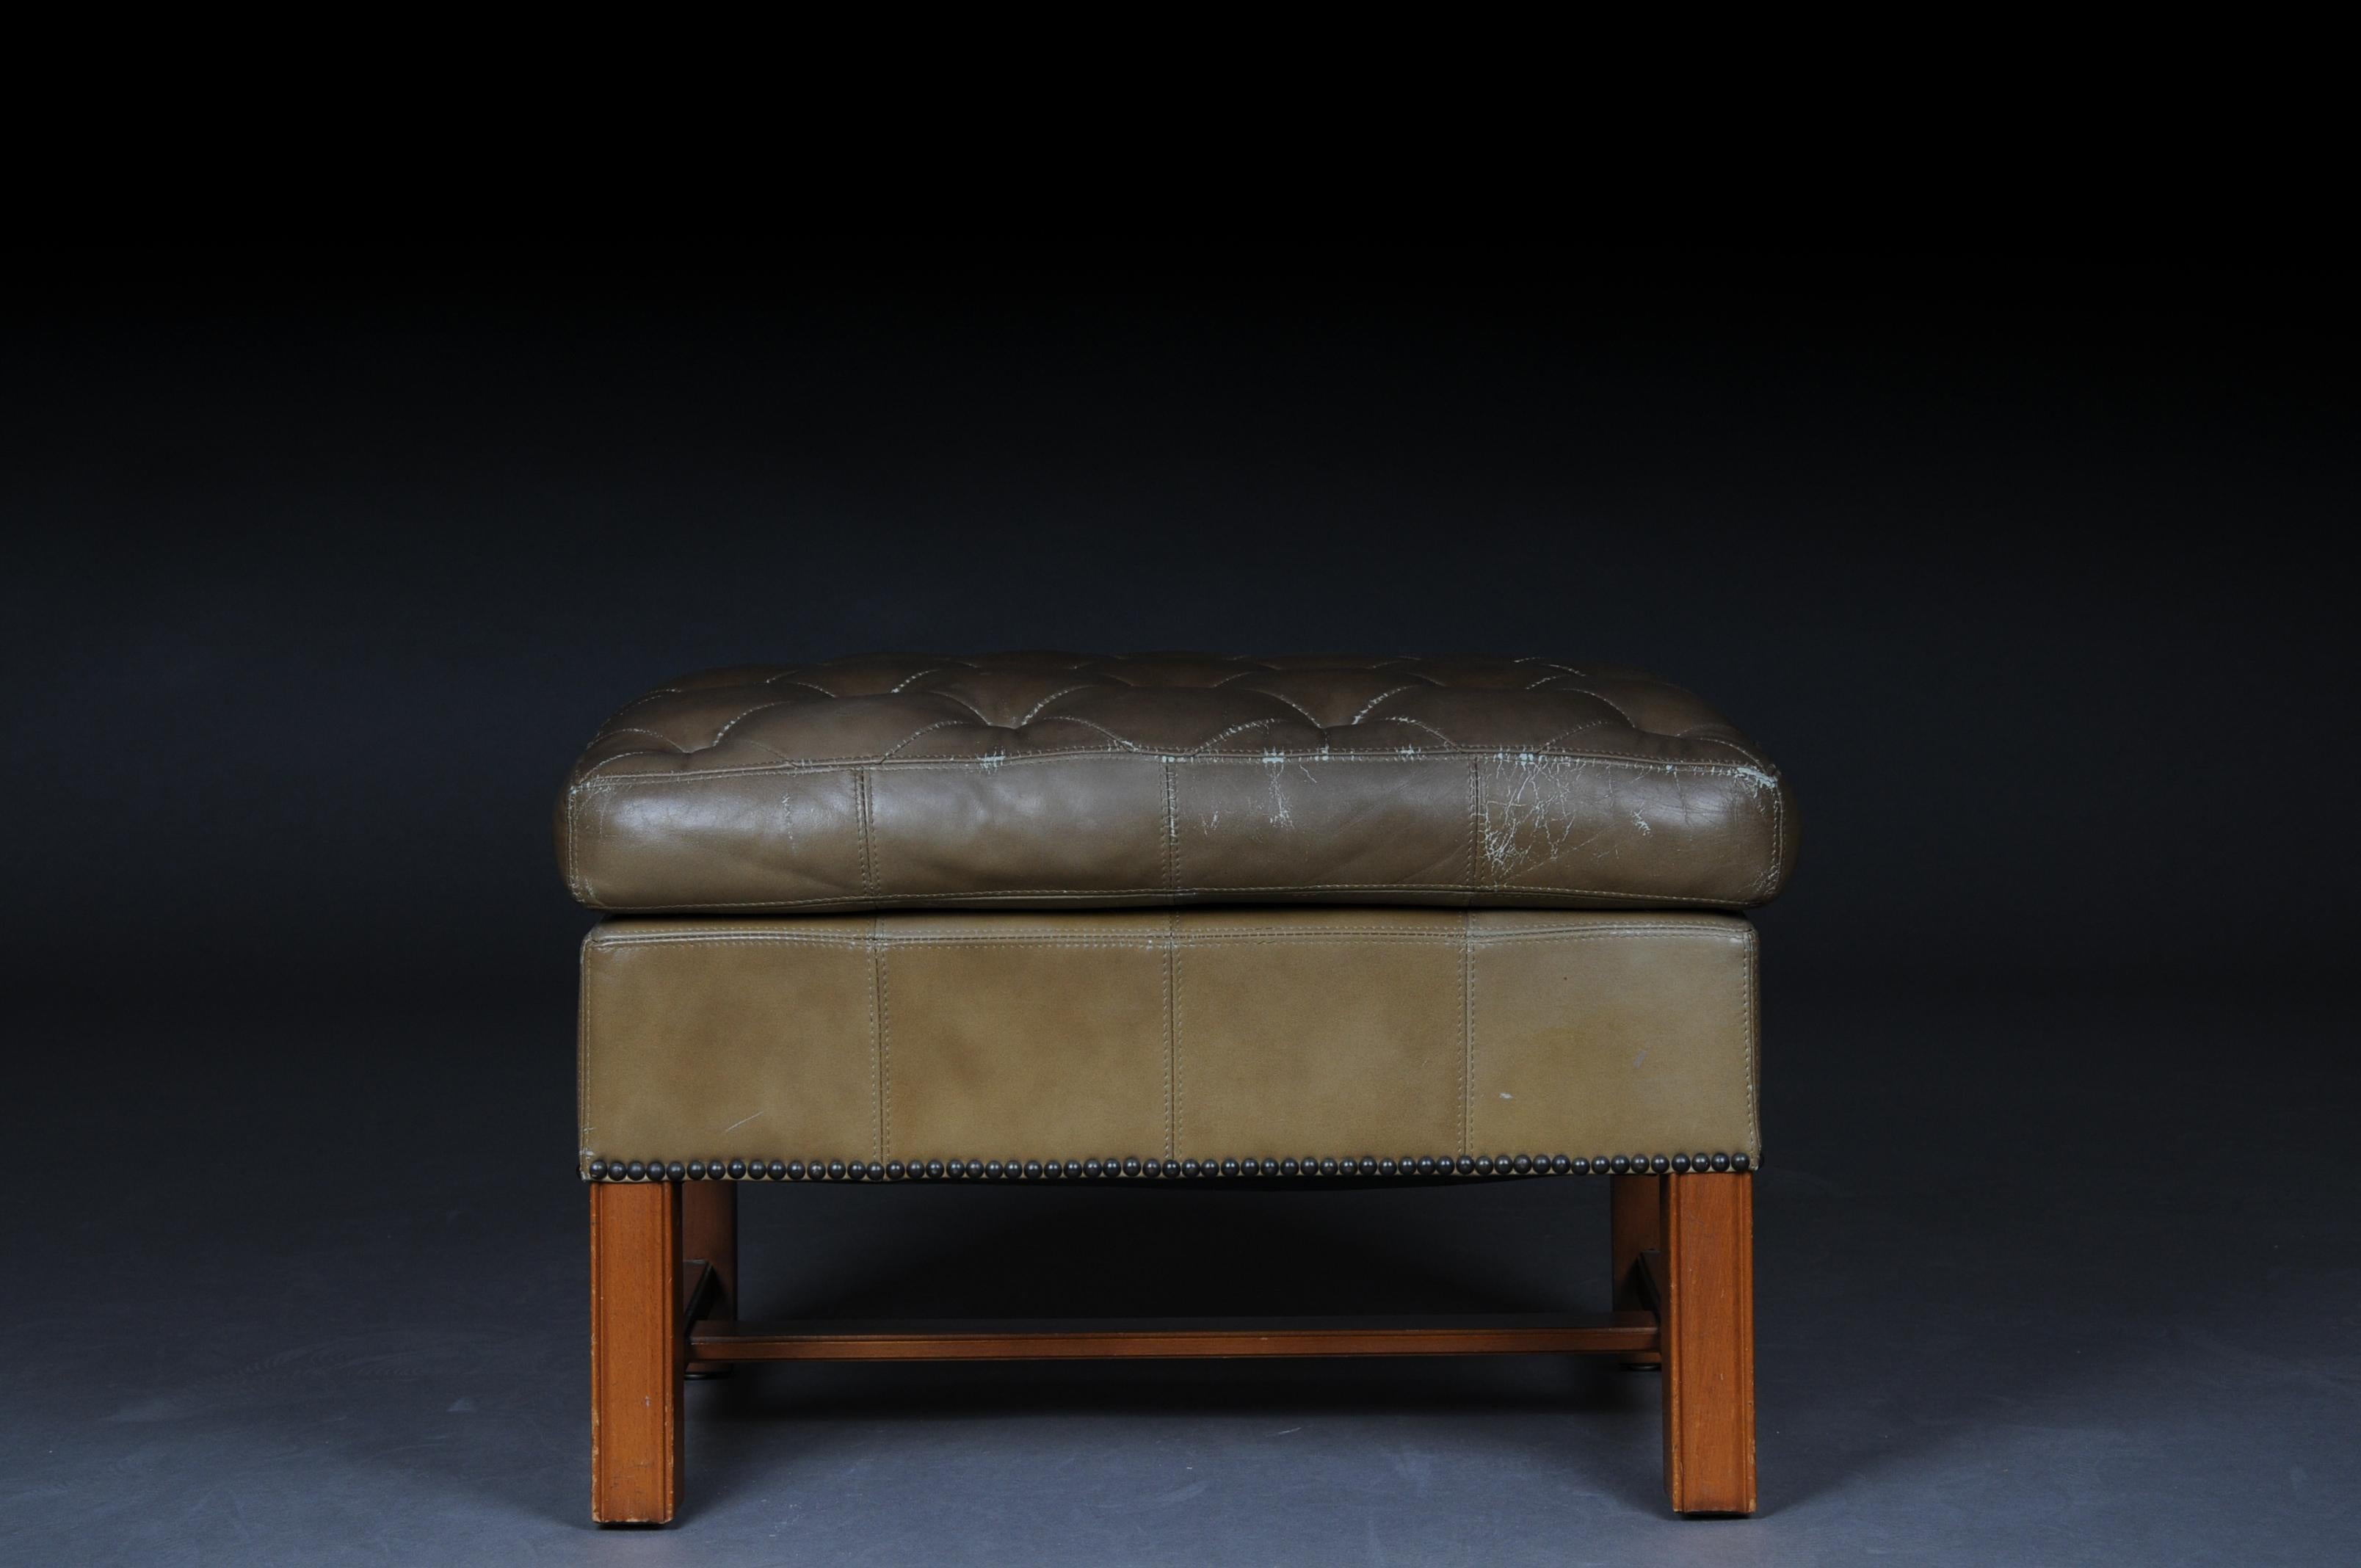 English gray Chesterfield stool / bench, 20th century

Chesterfield stool with a wooden yew frame. Knotted seat. Gray-green leather, England 20th century. Used vintage condition.

(V-232).